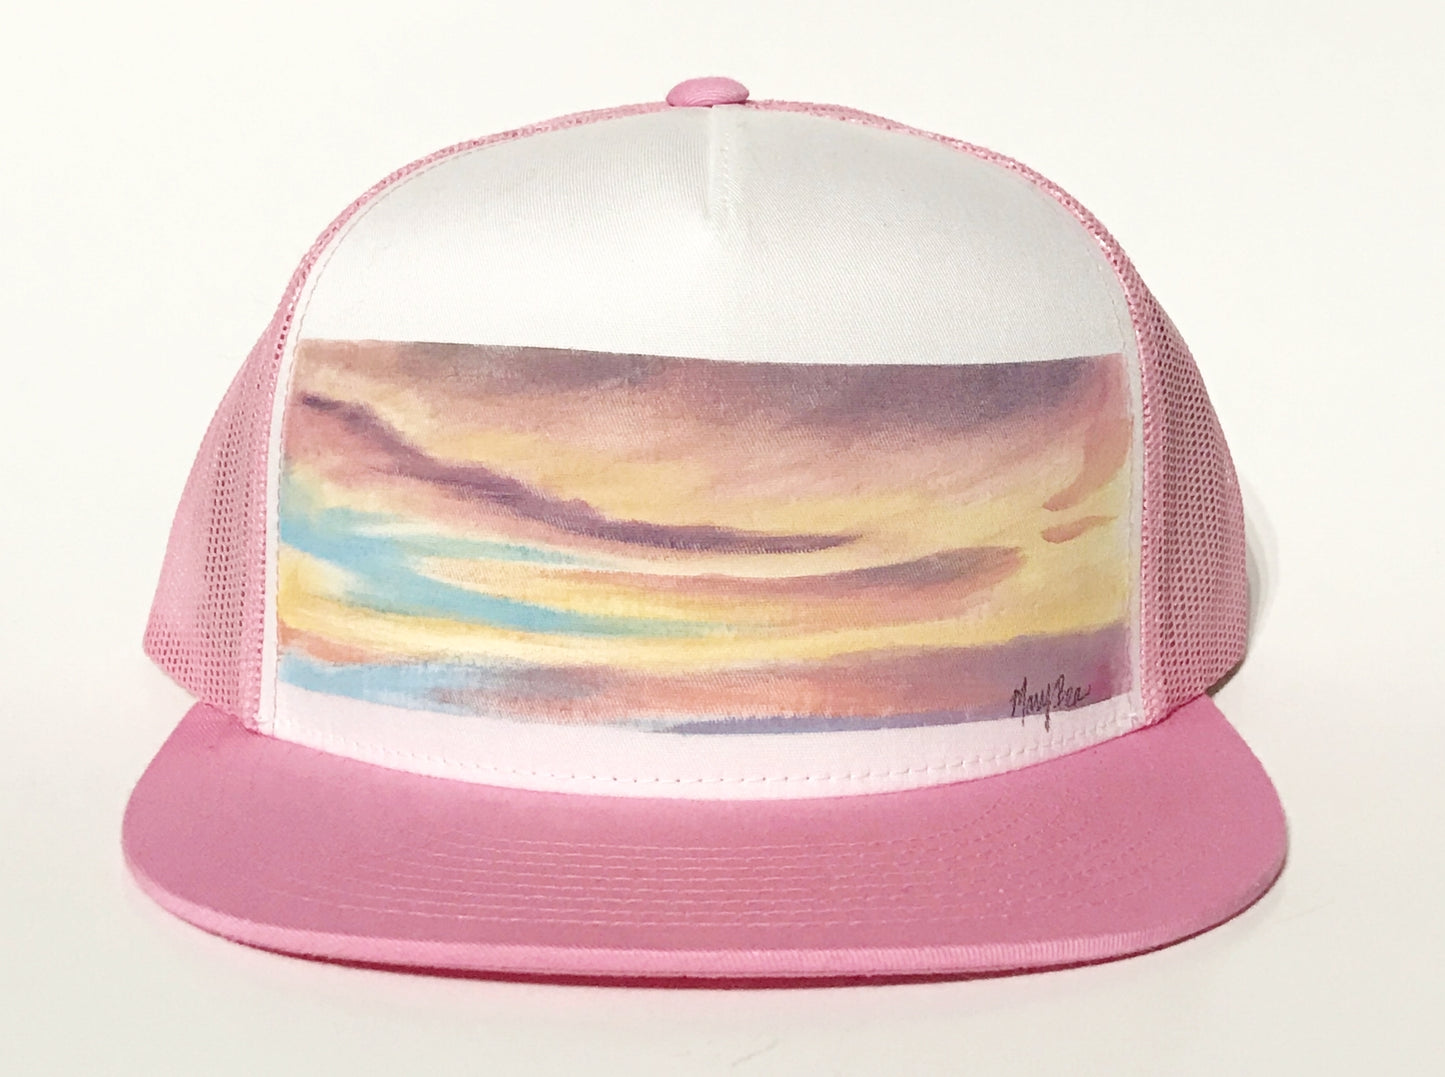 "Sunset" Hand Painted on Pink Snapback Trucker Hat